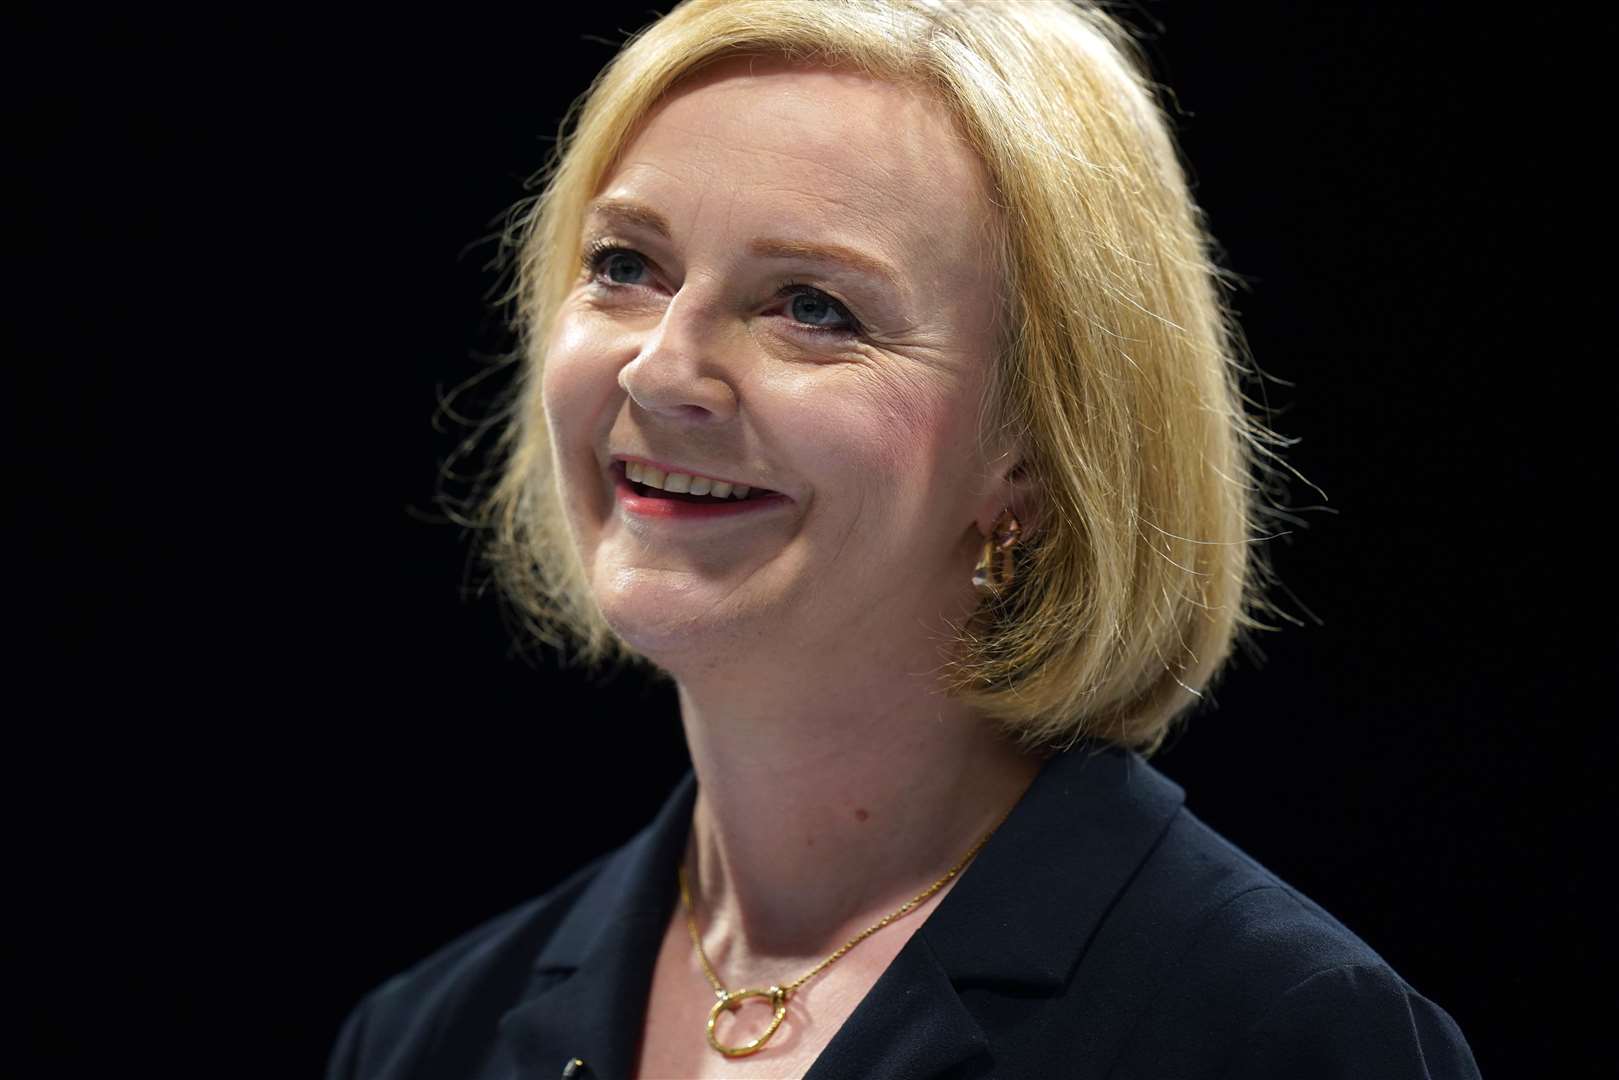 Frontrunner to become the next prime minister, Liz Truss (Jacob King/PA)